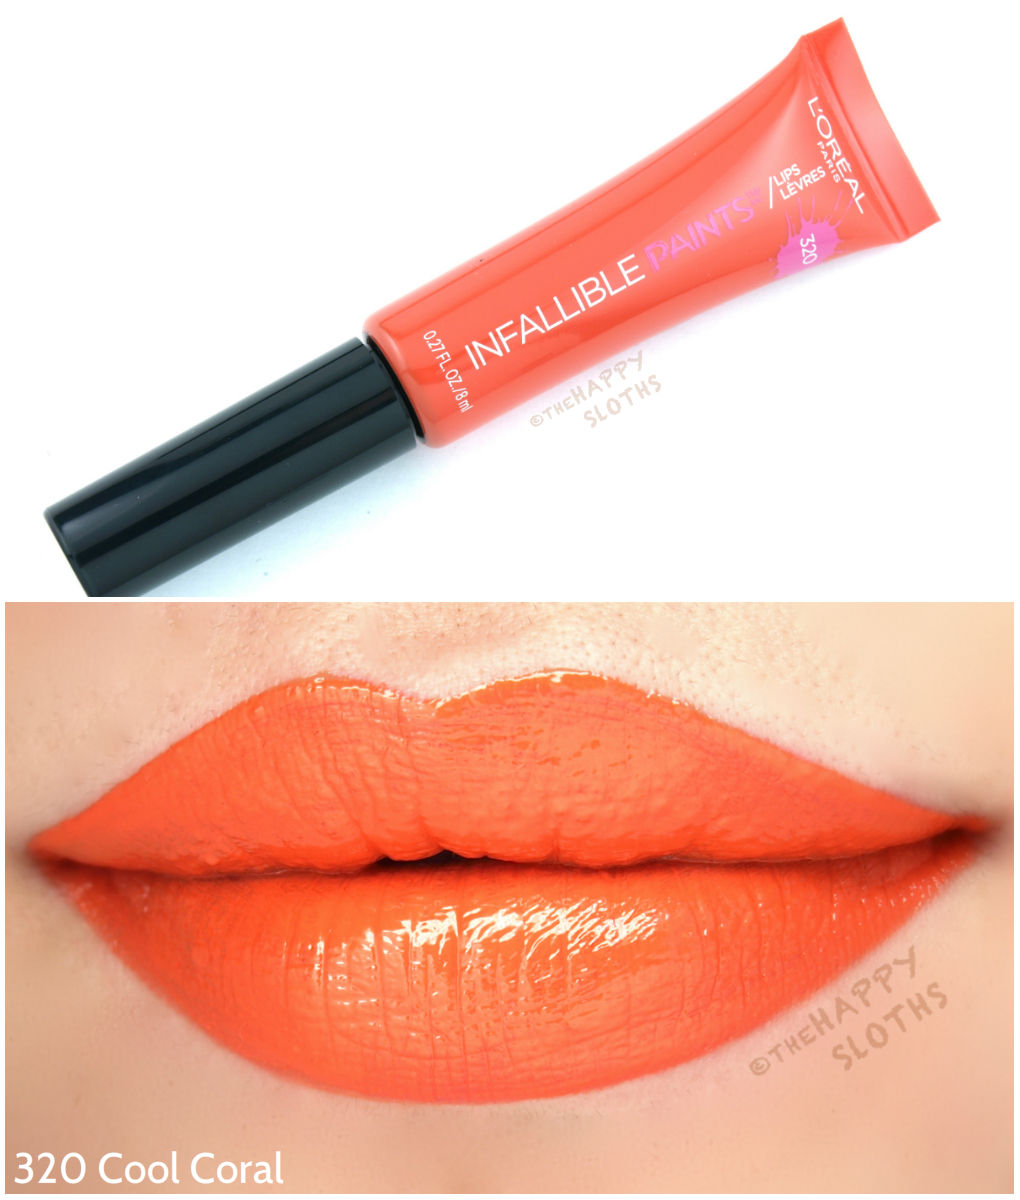 L'Oreal Infallible Lip Paints 320 Cool Coral